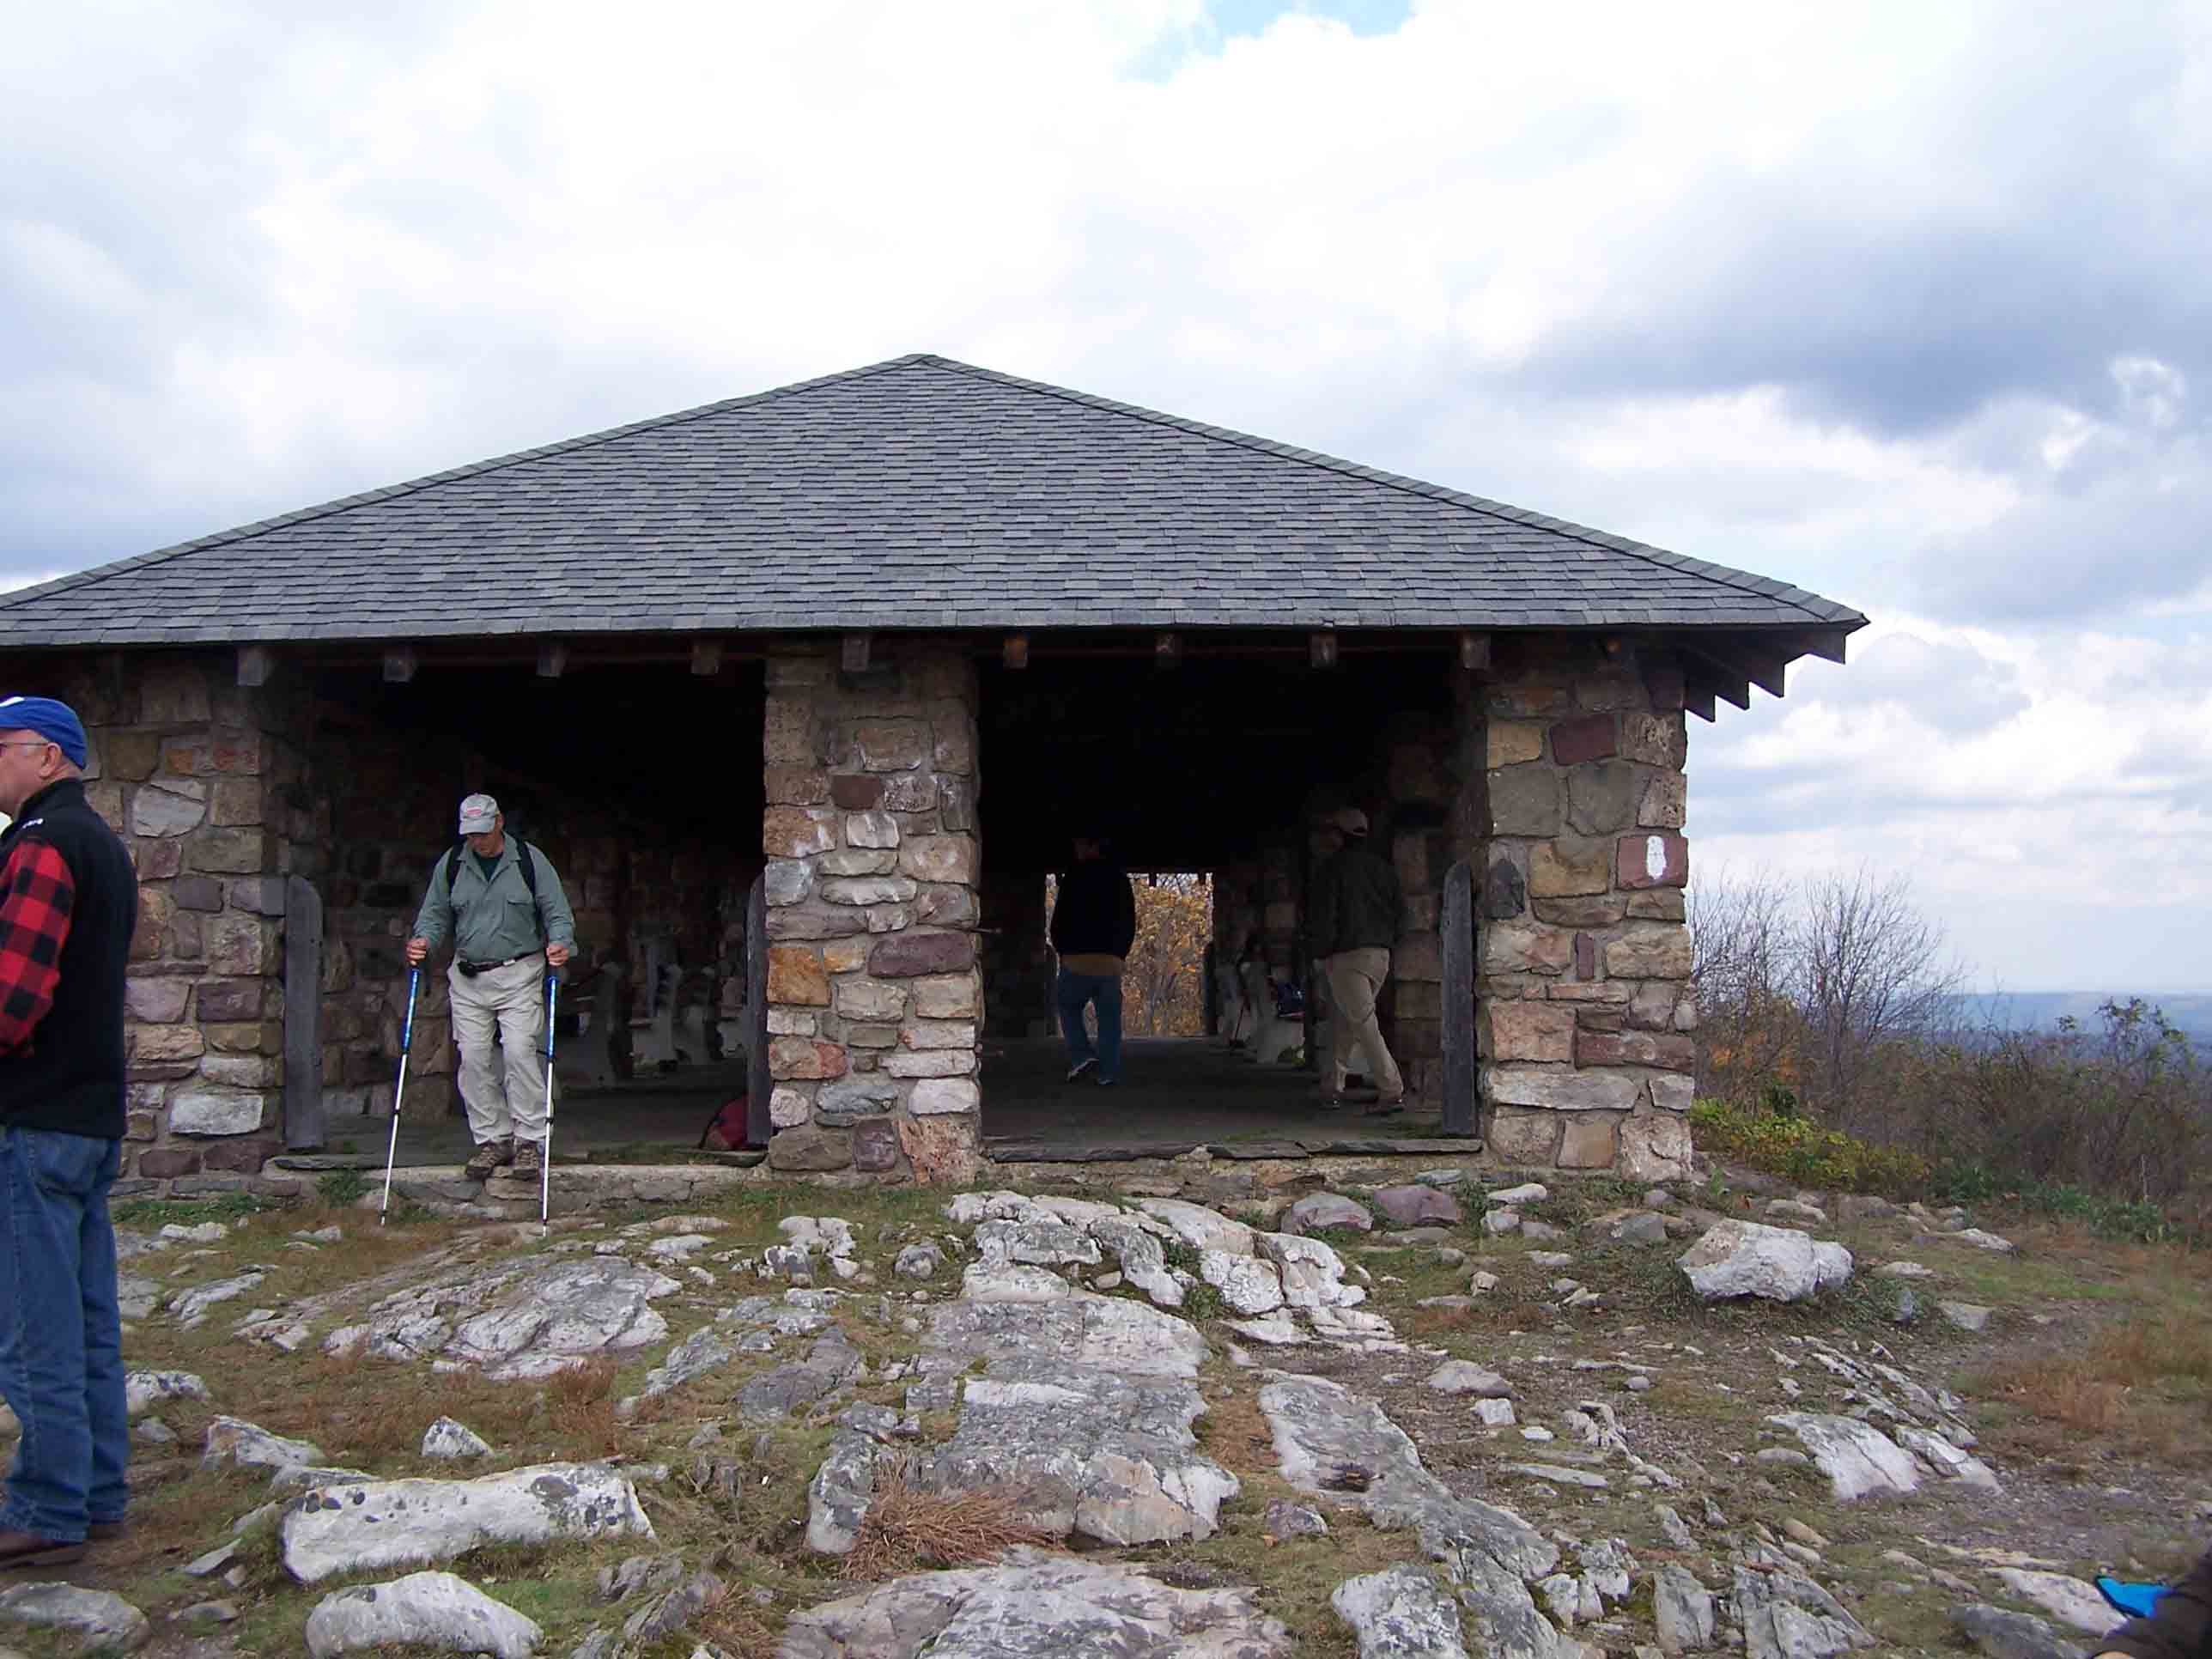 mm 8.9 - Day-use pavilion at summit of Sunrise Mt. Courtesy at@rohland.org